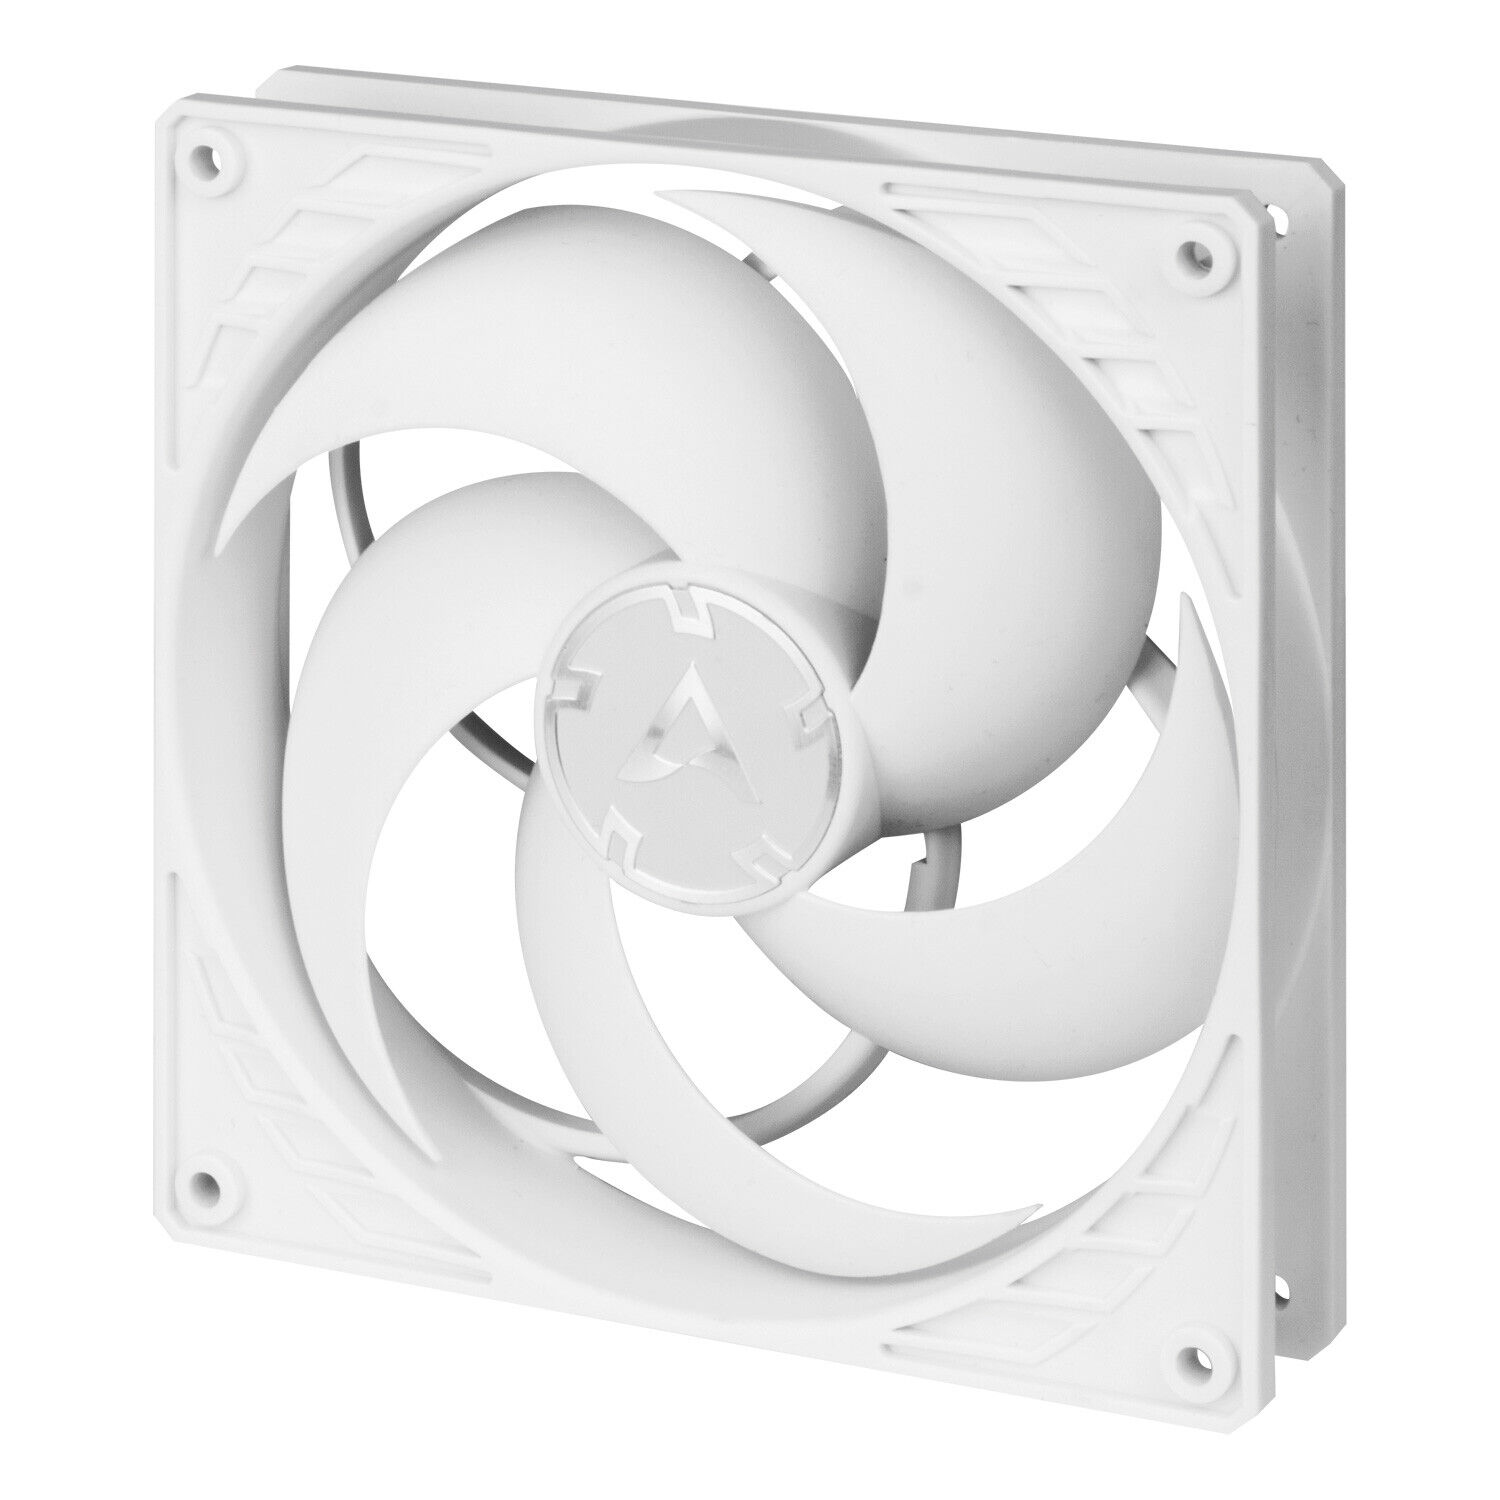 ARCTIC P14 PWM PST (White) 140 mm Case Fan with PWM Sharing Technology PST PC